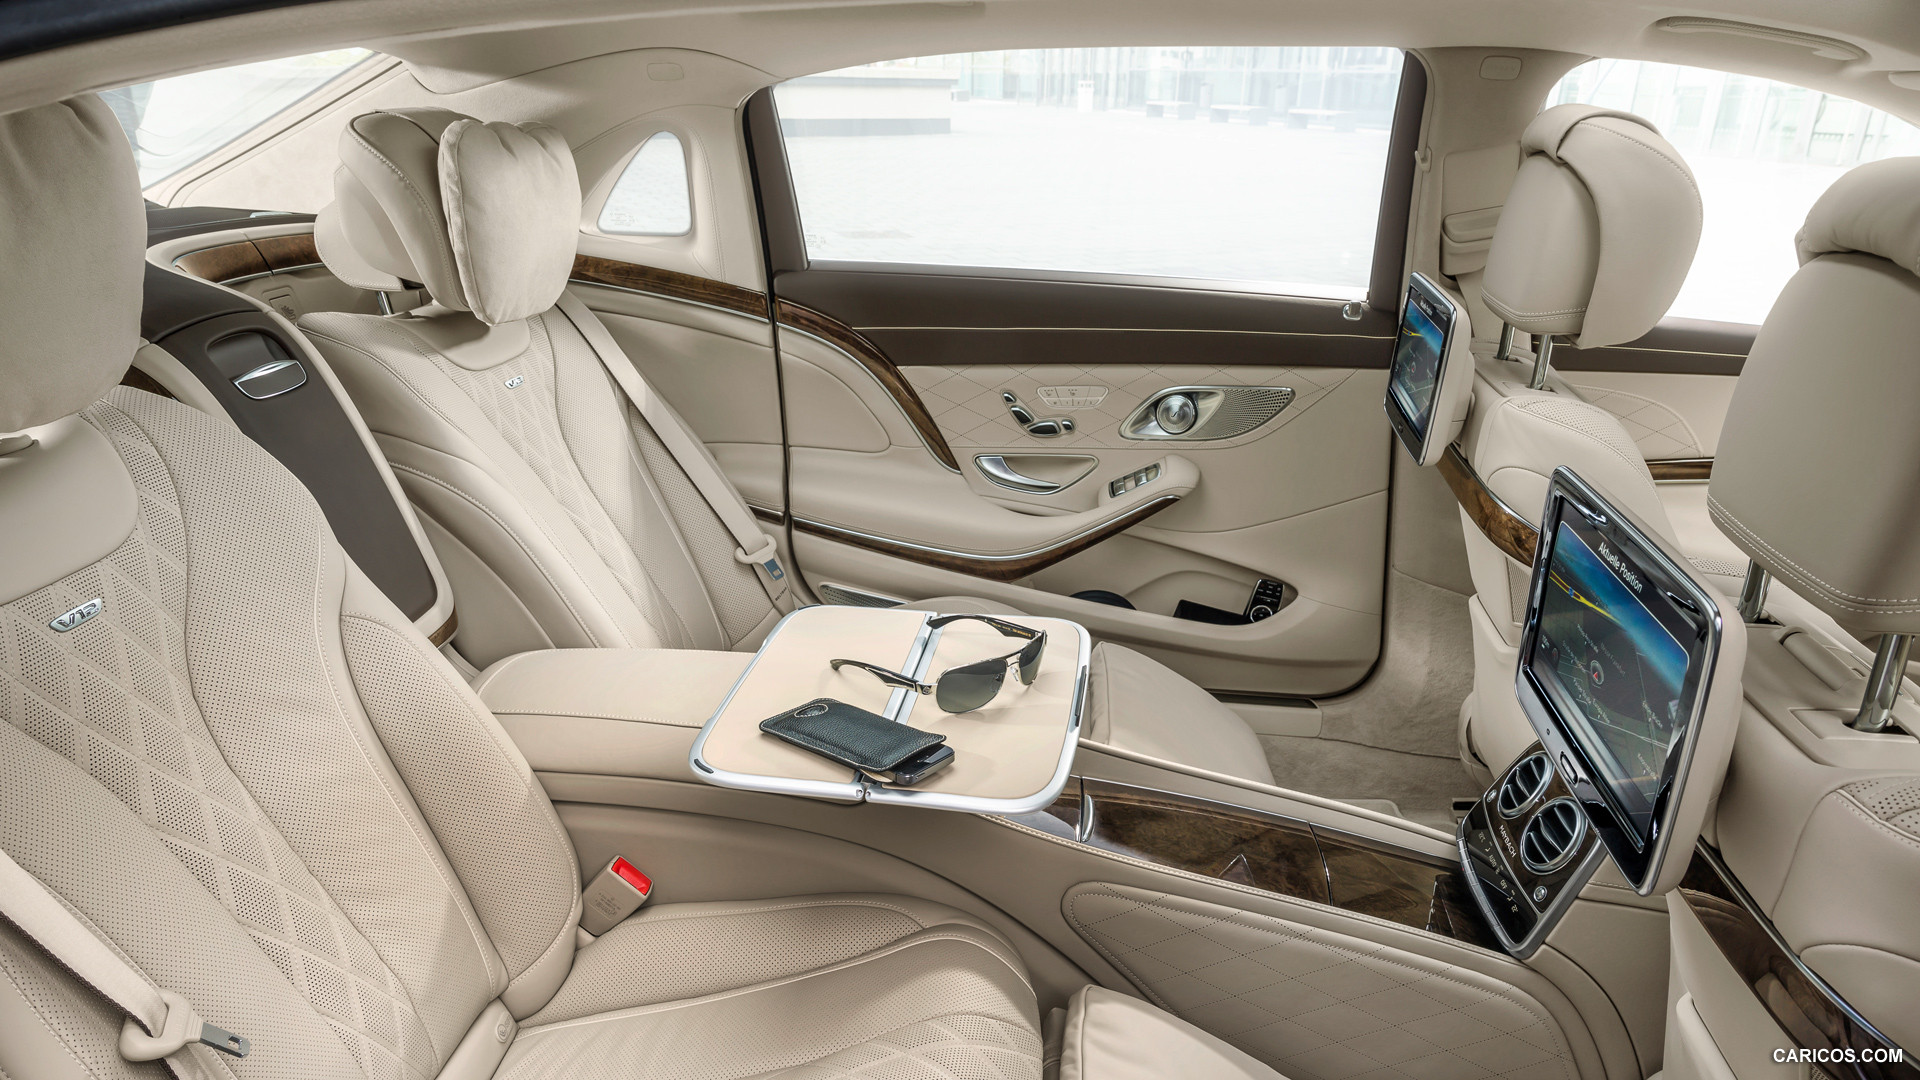 2016 Mercedes-Maybach S-Class S600 - Interior Rear Seats, #41 of 225